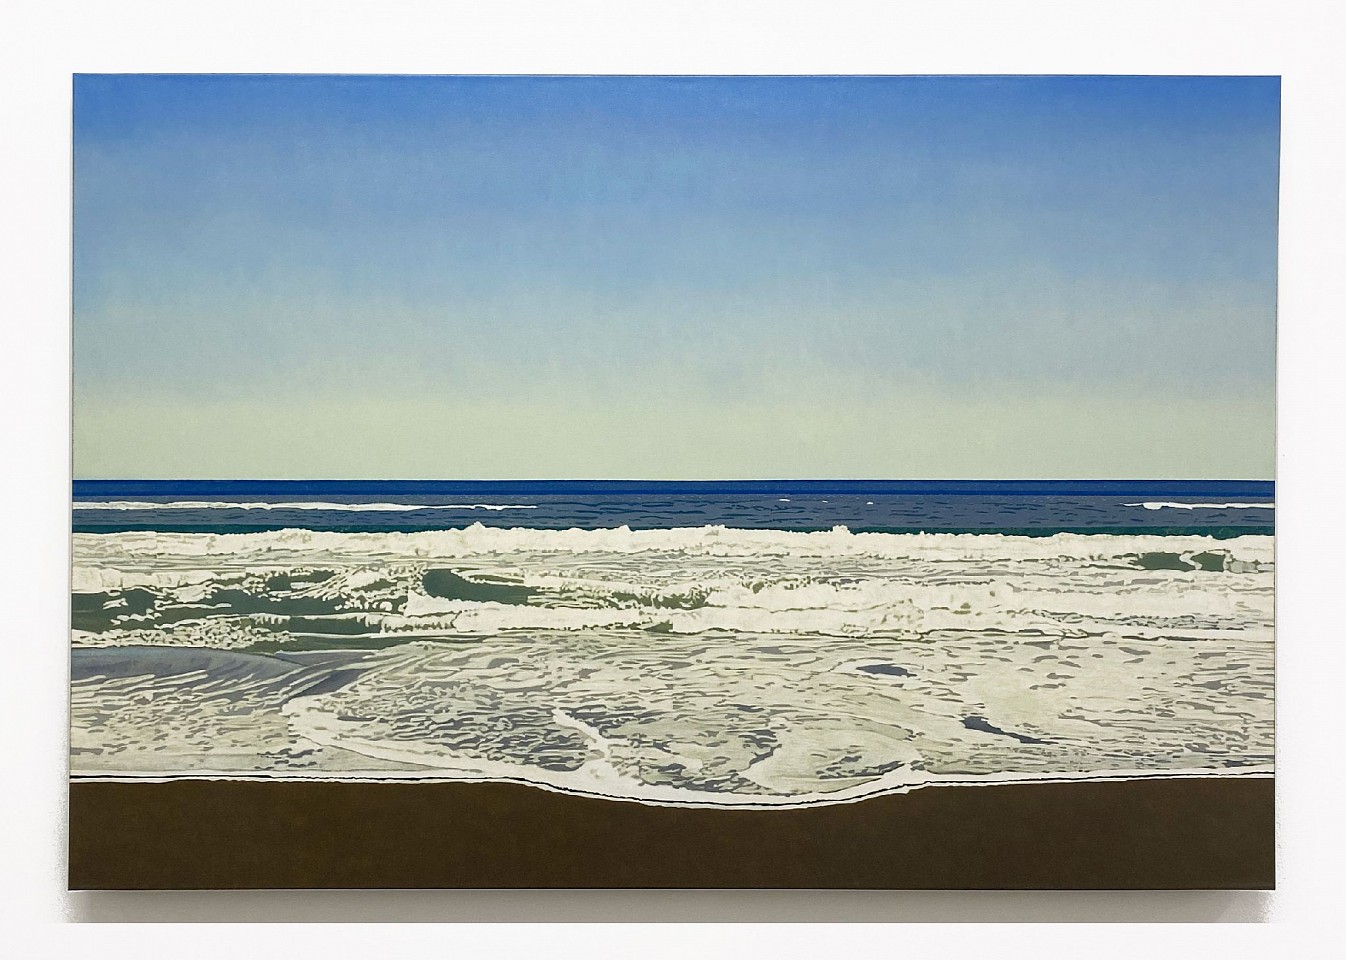 Clay Wagstaff
Ocean no. 89, 2024
WAG404
oil on canvas, 48 x 72 inches